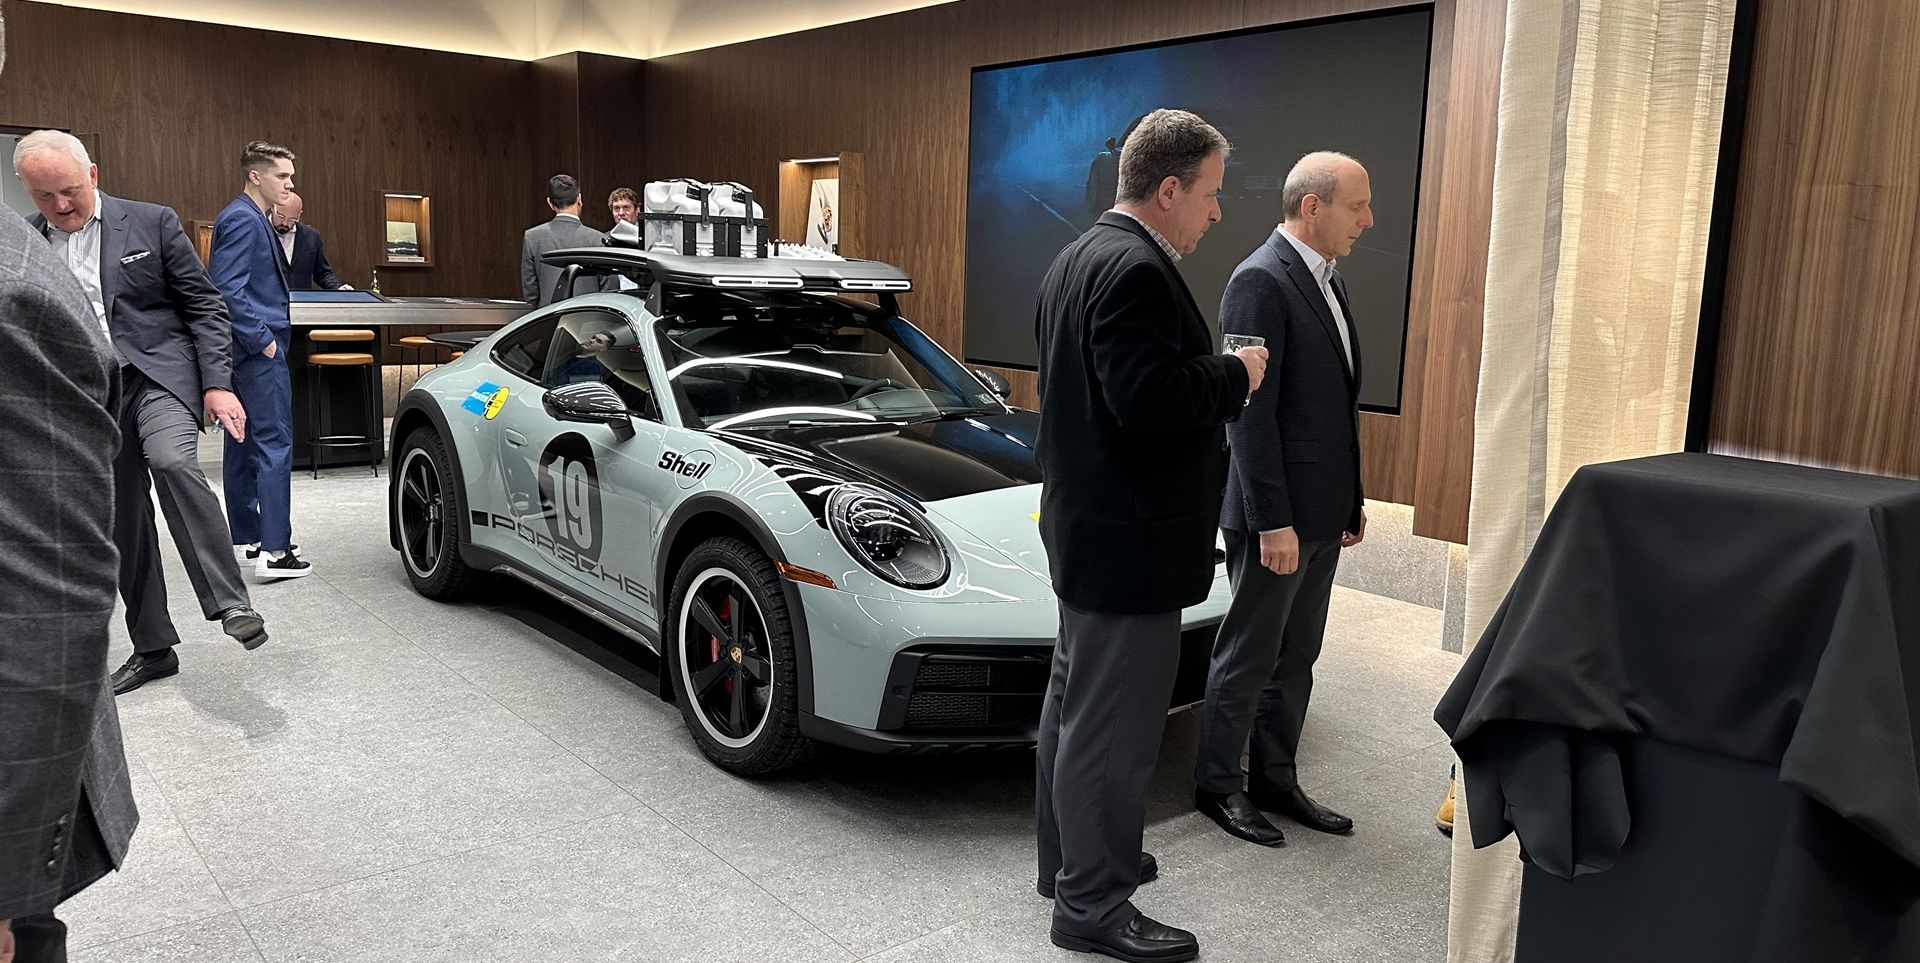 Why Porsche Is Opening Showrooms in Malls